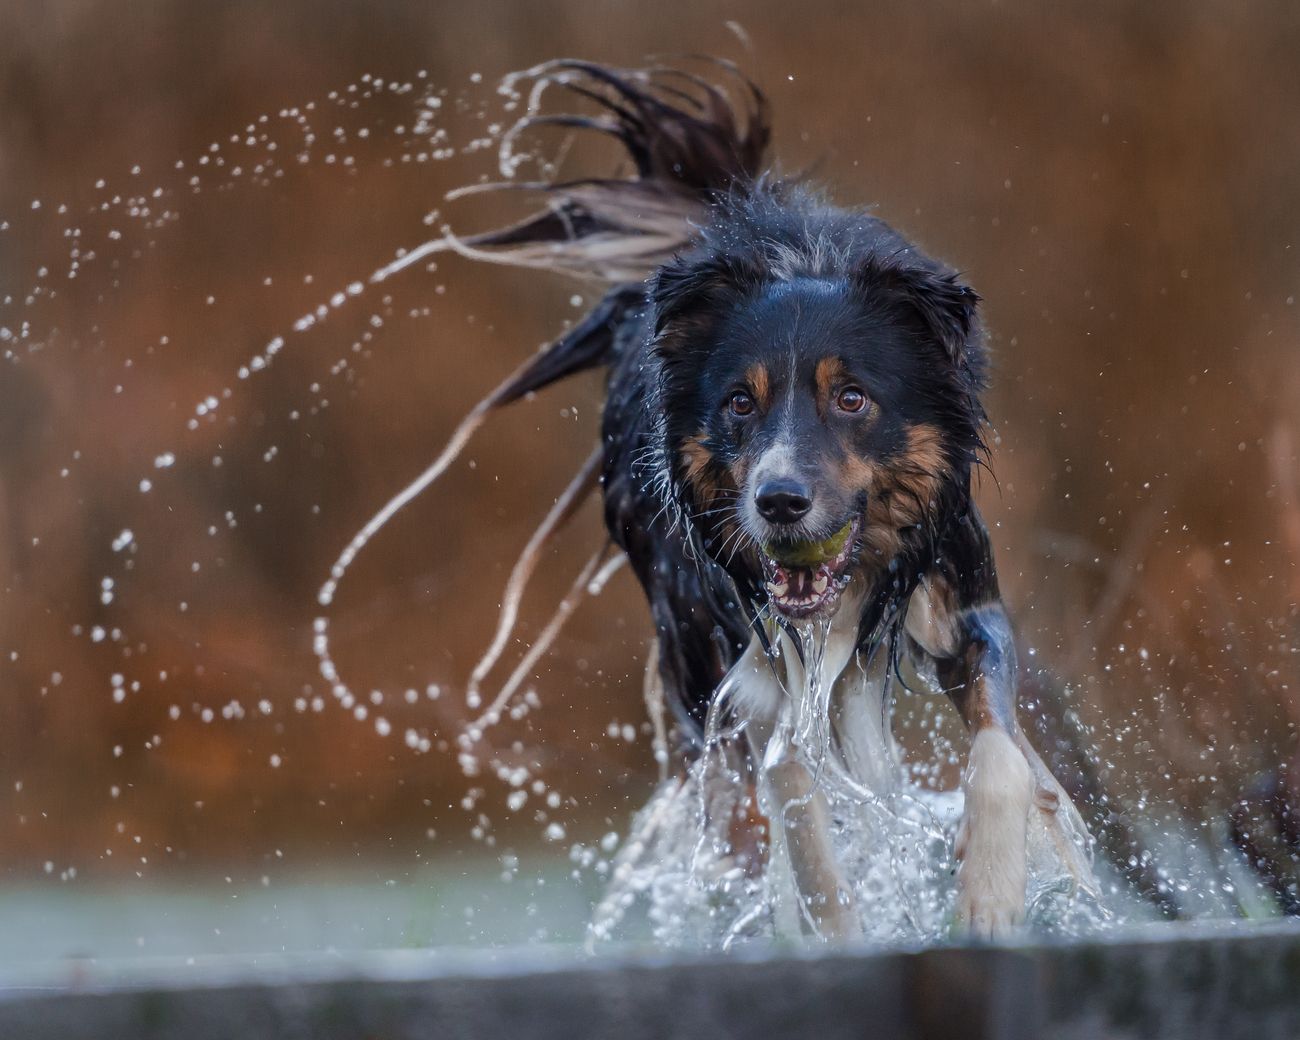 Dogs In Action Photo Contest Winners